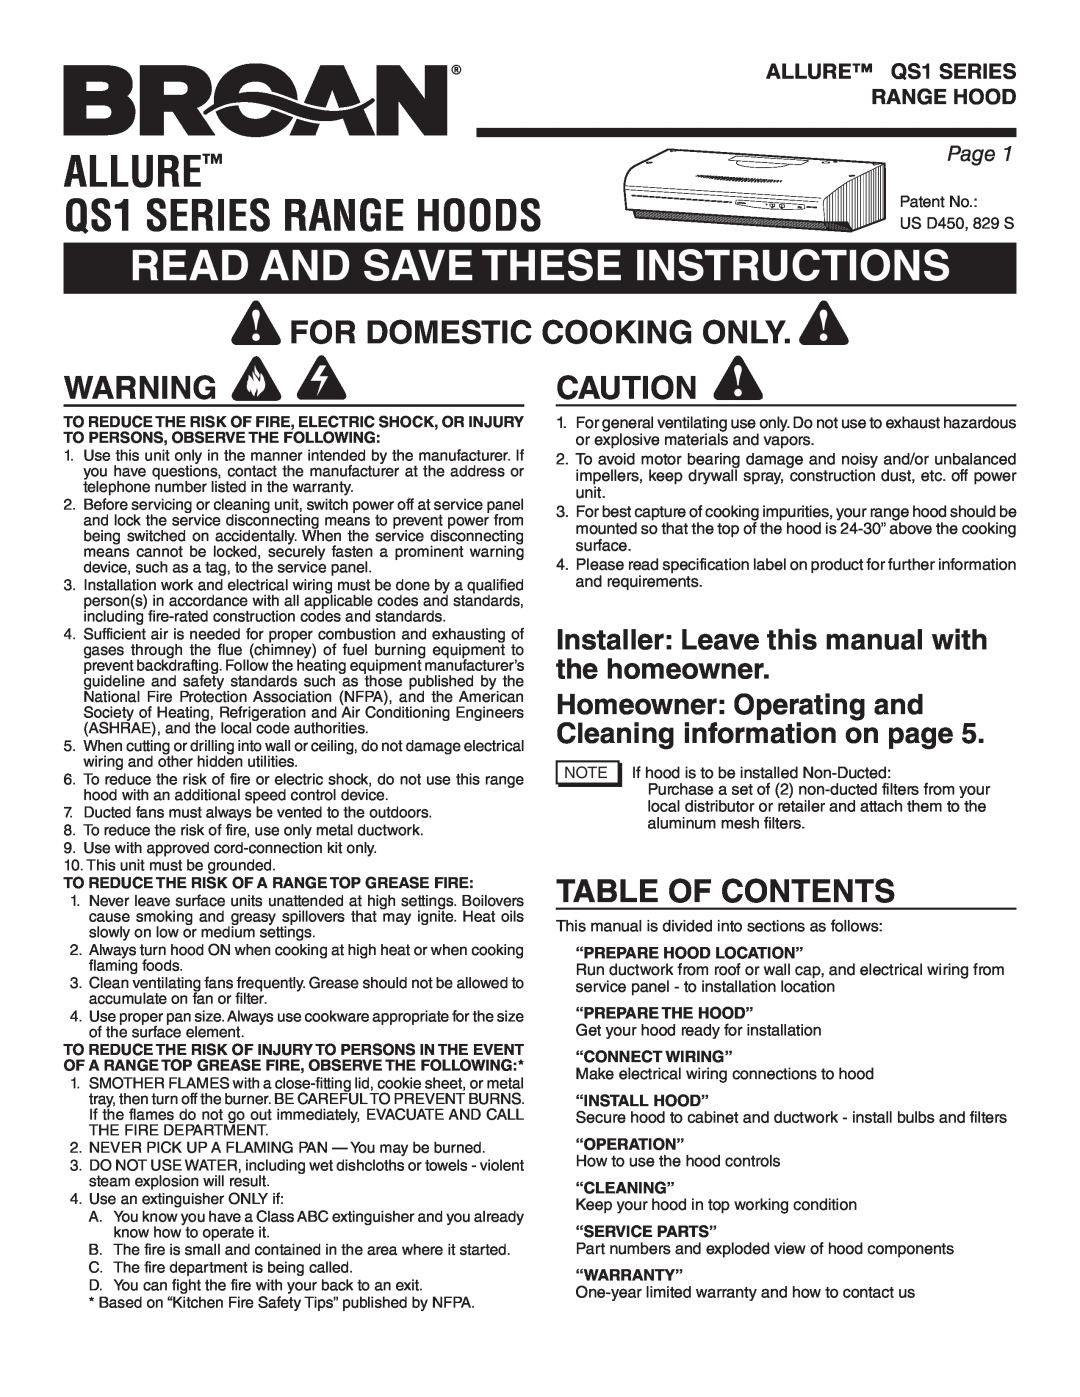 Broan QS136BL warranty Read And Save These Instructions, For Domestic Cooking Only, Table Of Contents, Page, “Operation” 